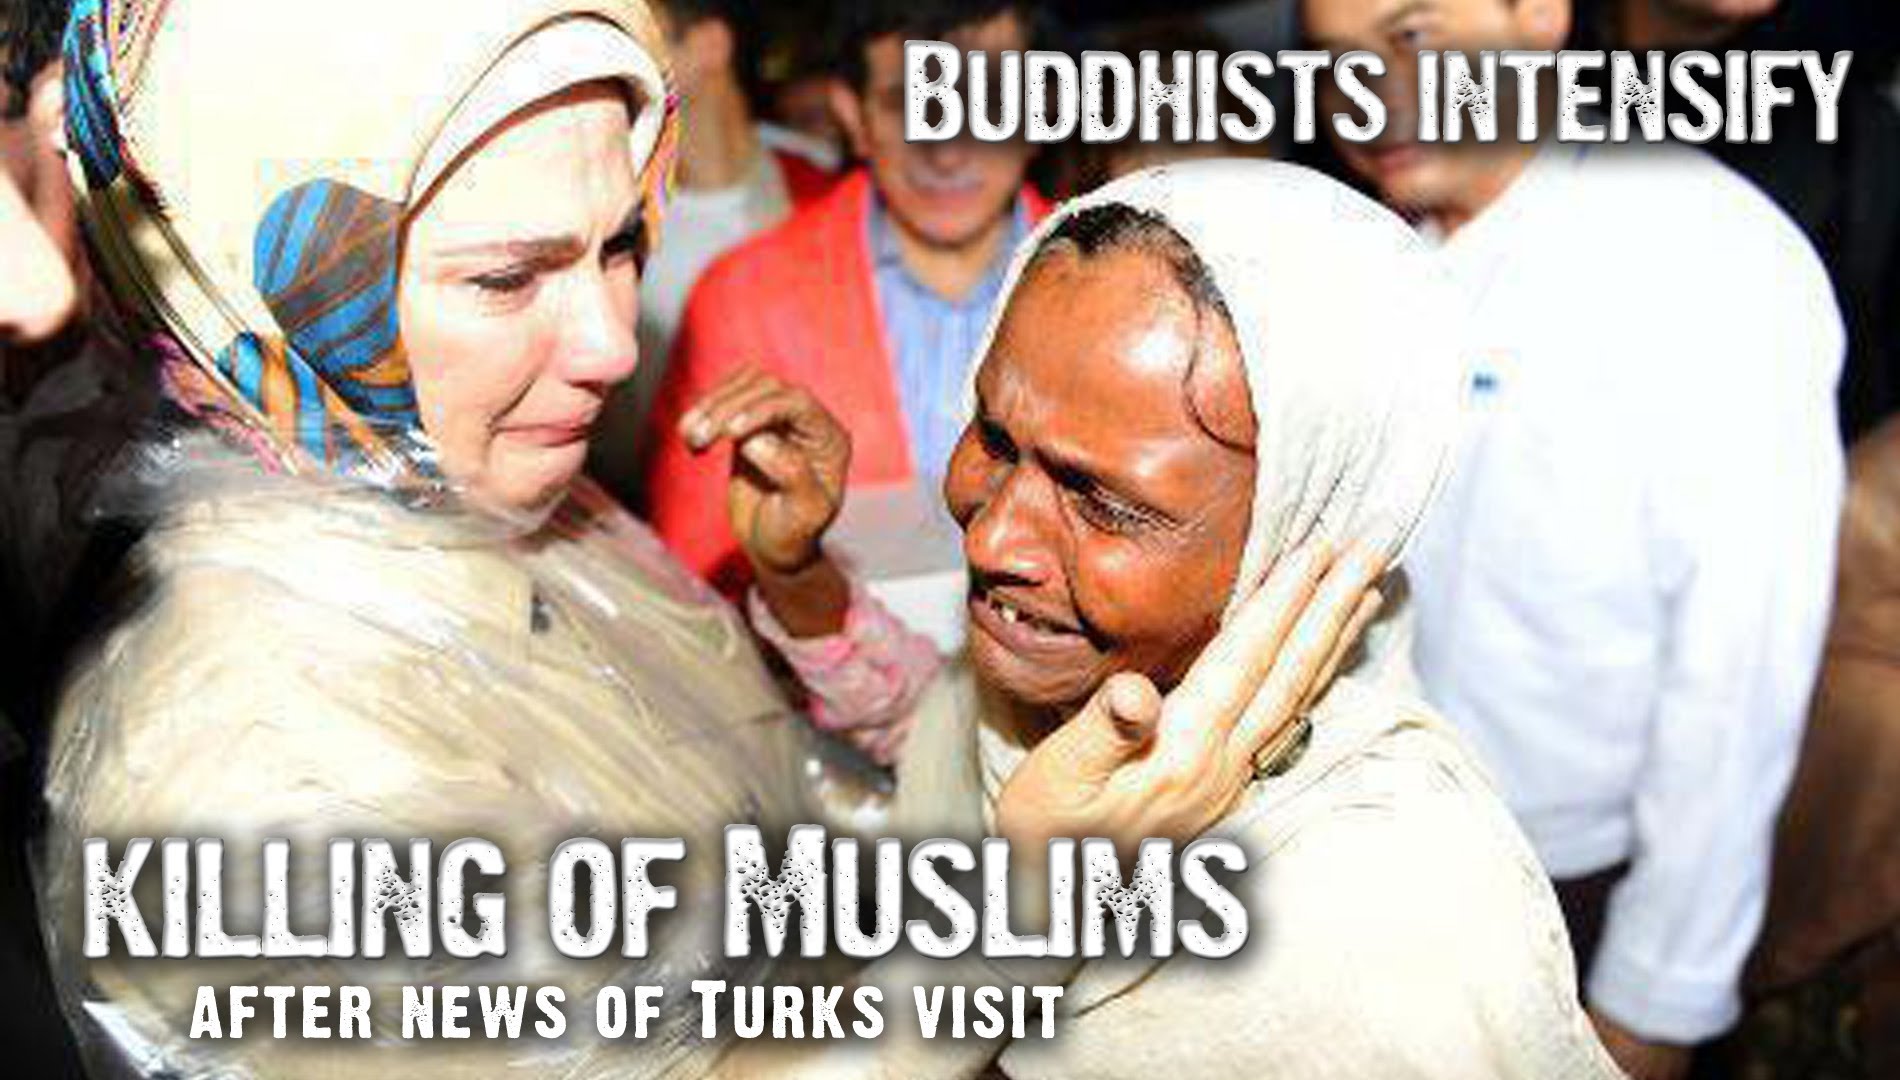 Buddhists Intensify Killing of Muslims after news of 'Turks visit to Burma'